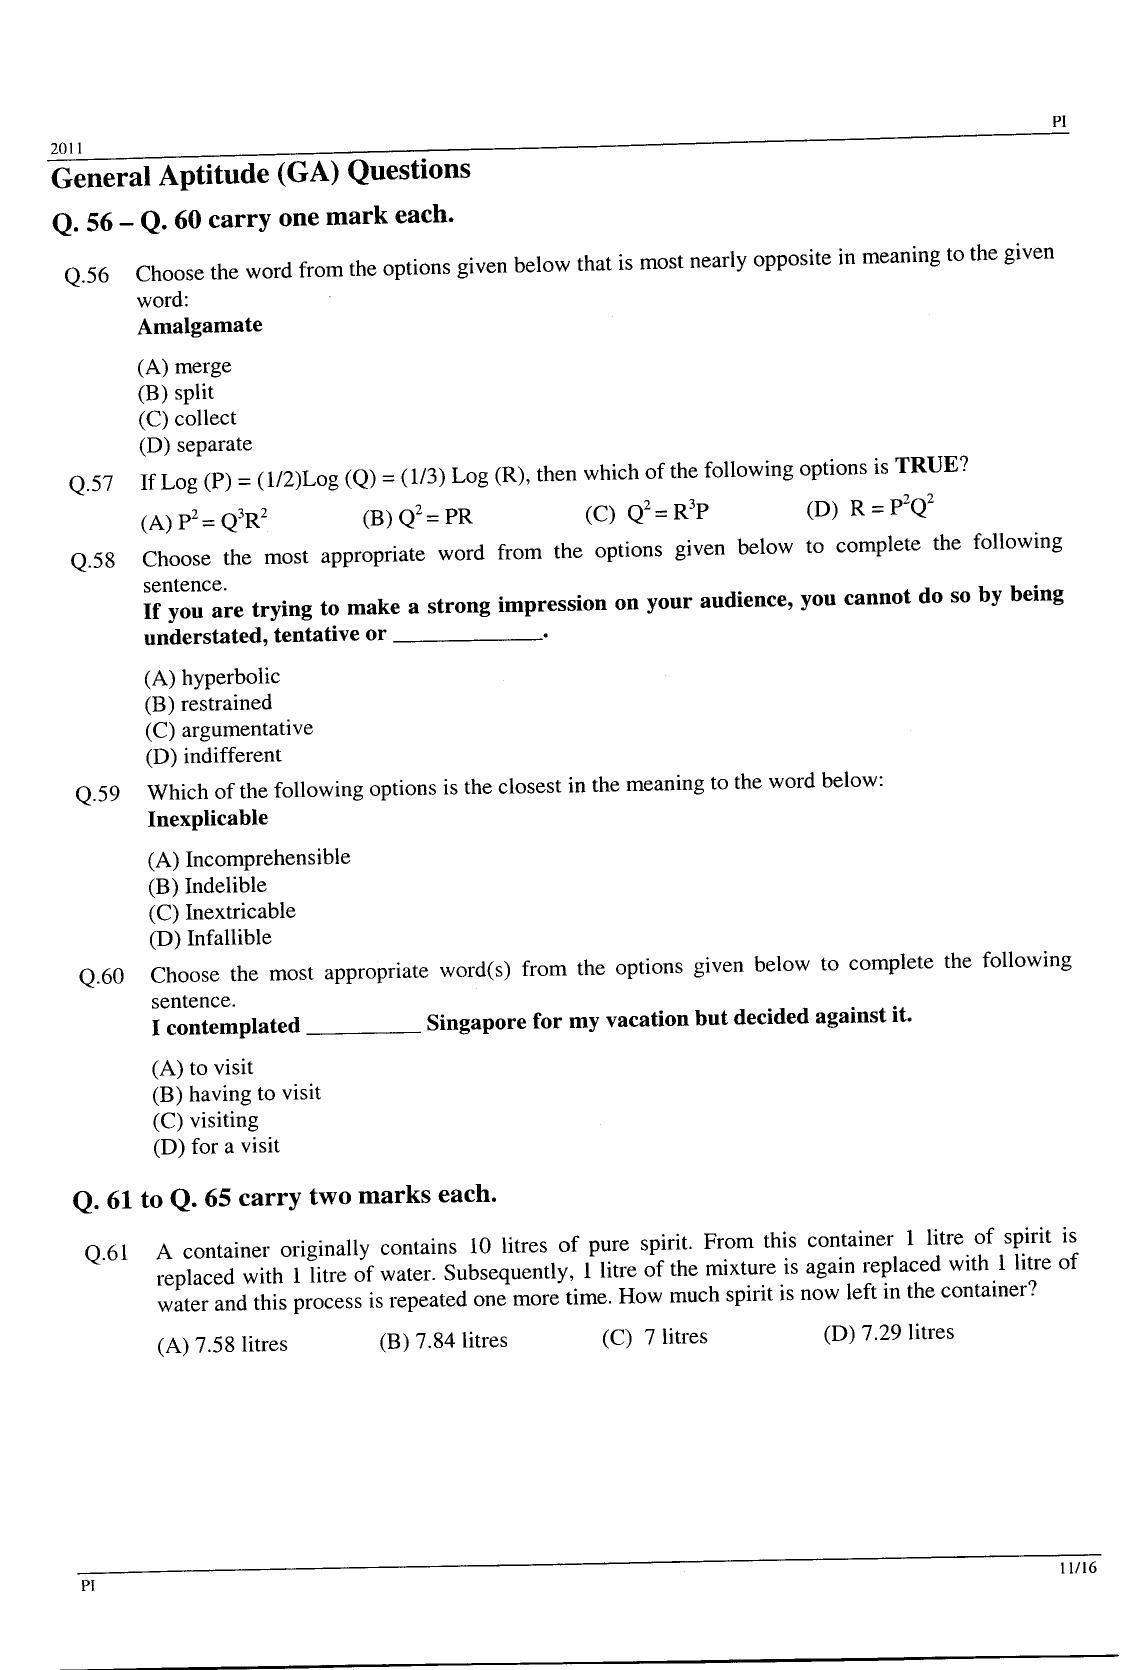 GATE 2011 Production and Industrial Engineering (PI) Question Paper with Answer Key - Page 11